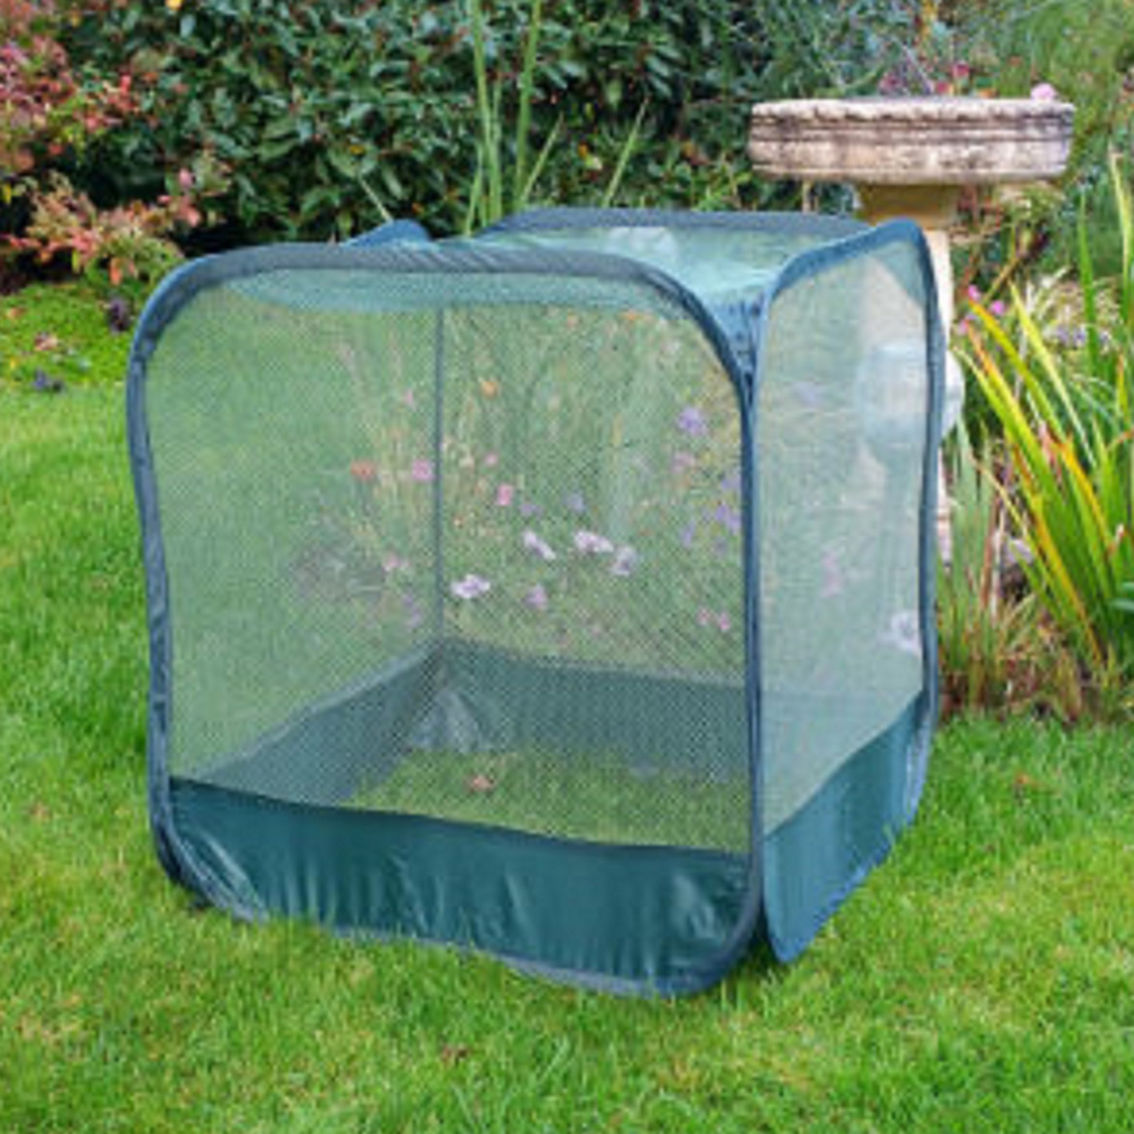 Bosmere Nylon Pop-Up Insect and Pest Protection Plant Cage - Image 2 of 2